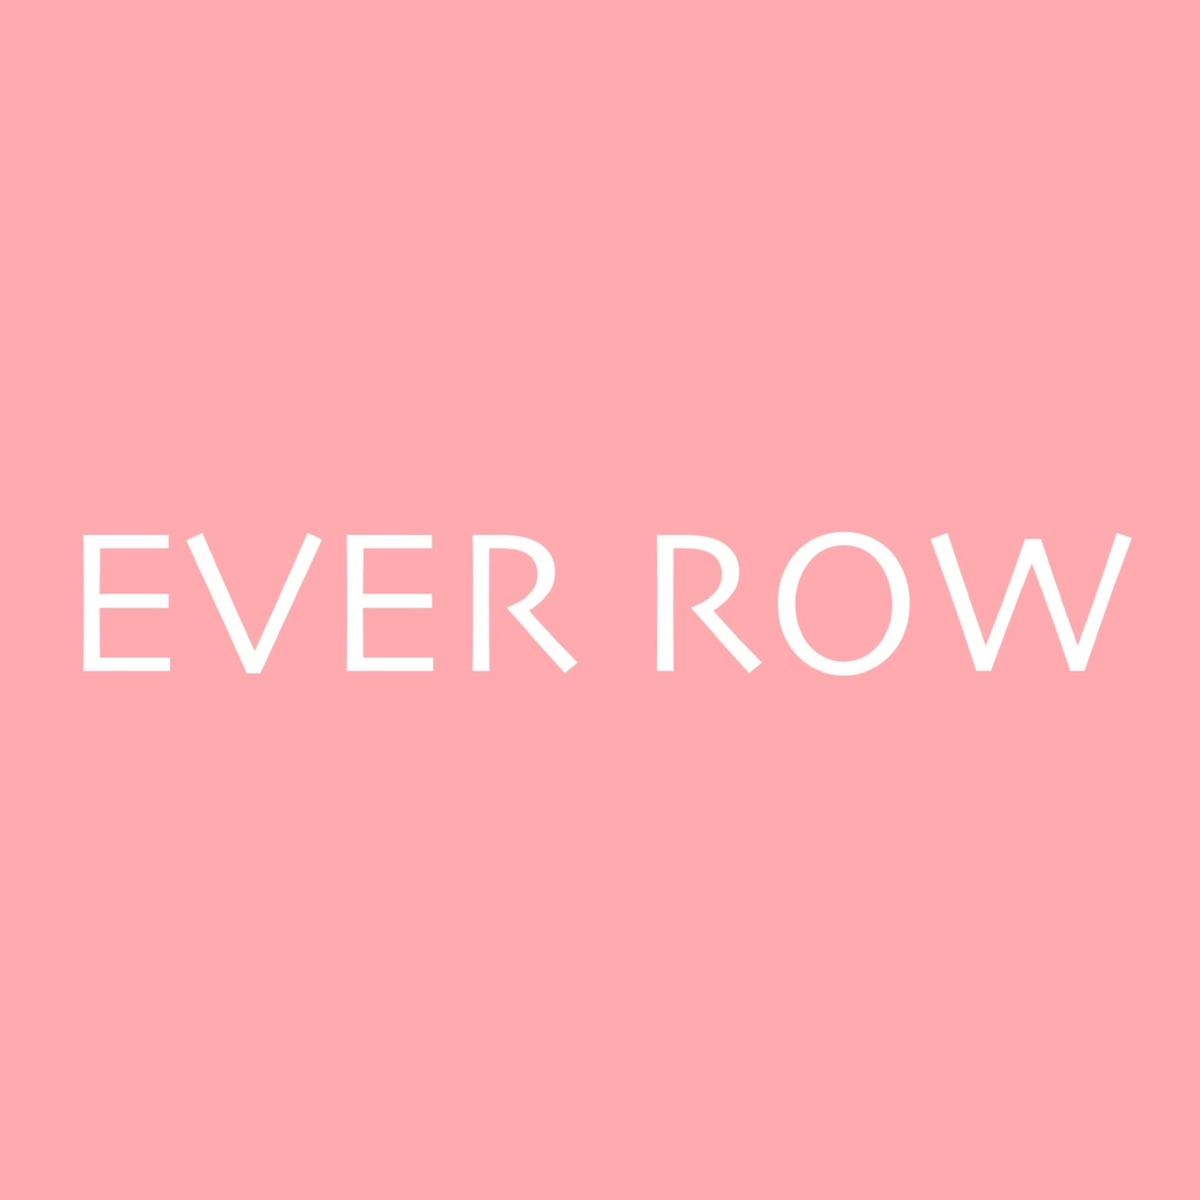 Ever Row's images